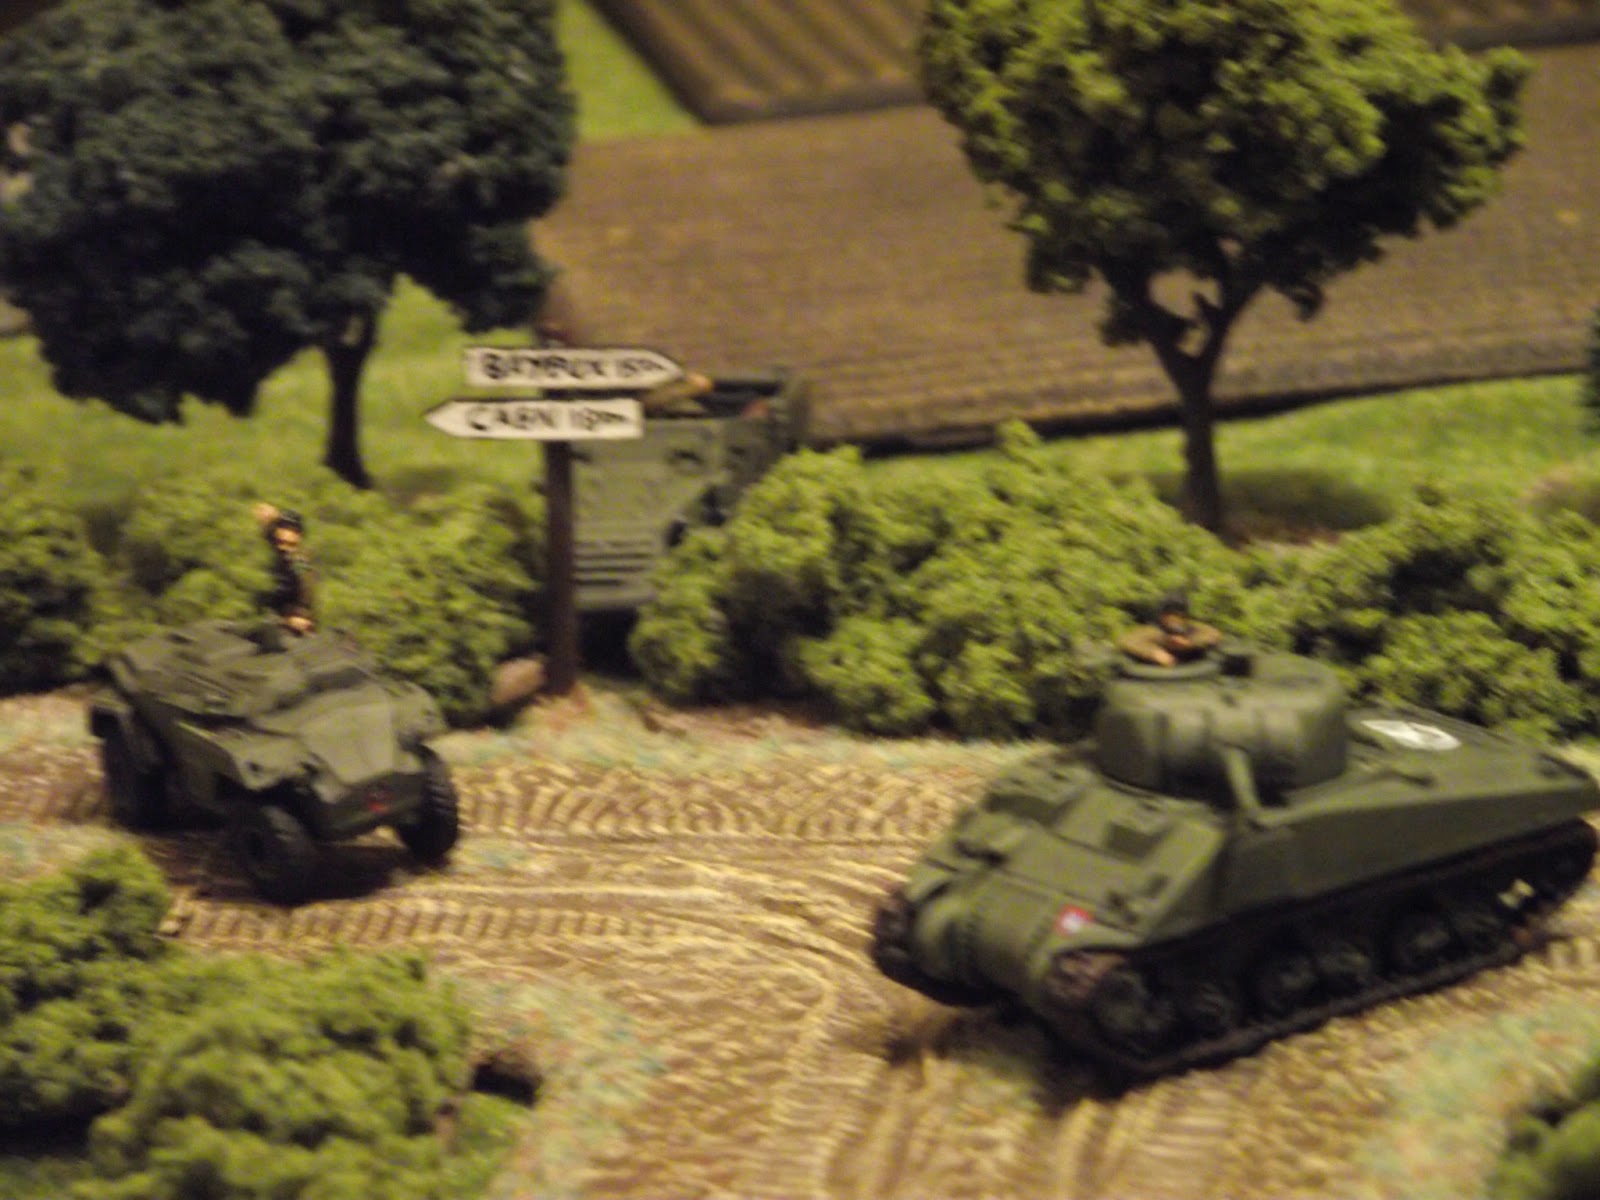   The British cannot seem to spot into the town, so the armour decides to force the issue by advancing around the bend.  